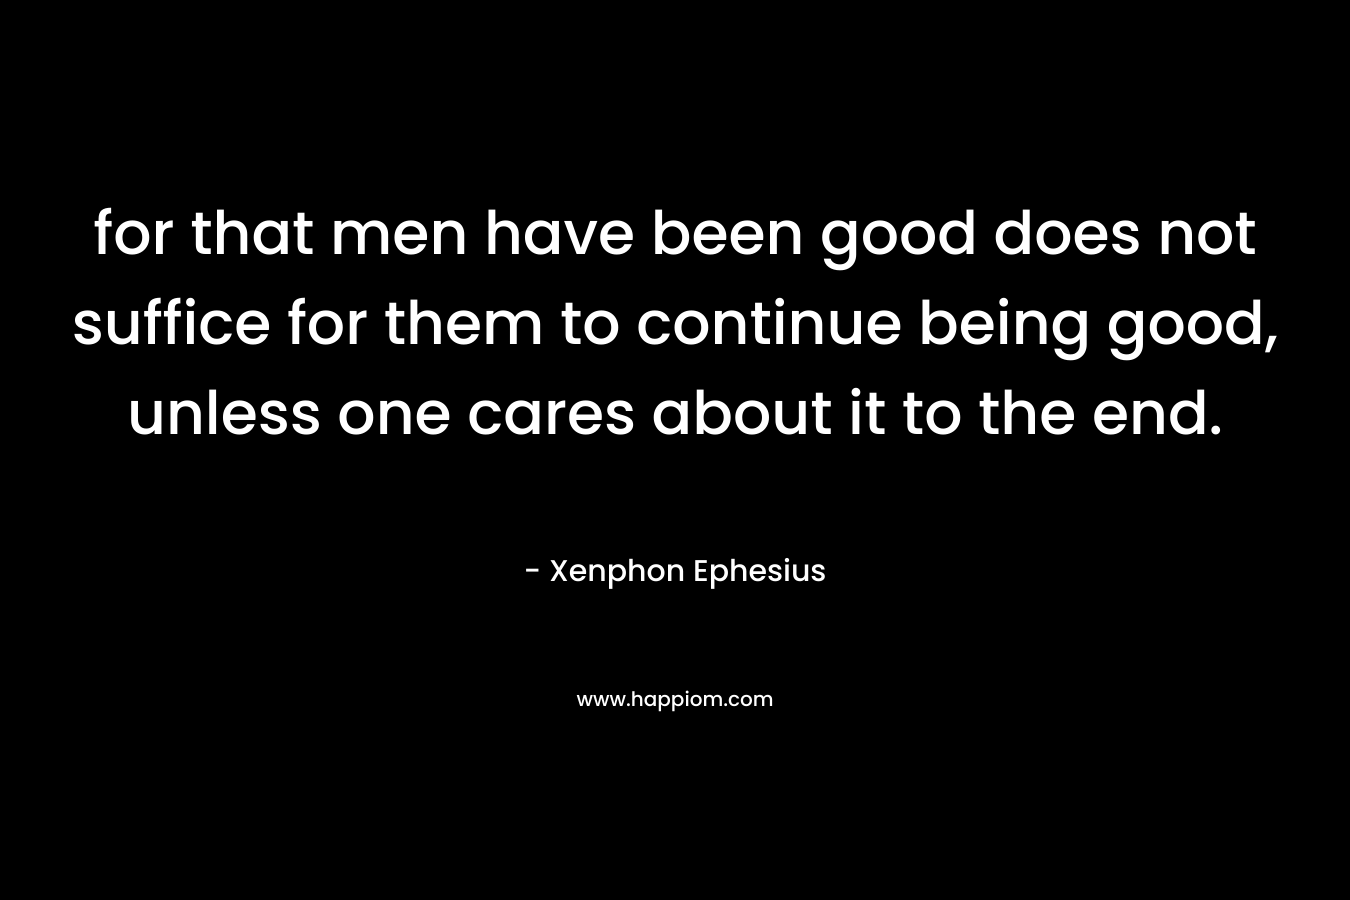 for that men have been good does not suffice for them to continue being good, unless one cares about it to the end.